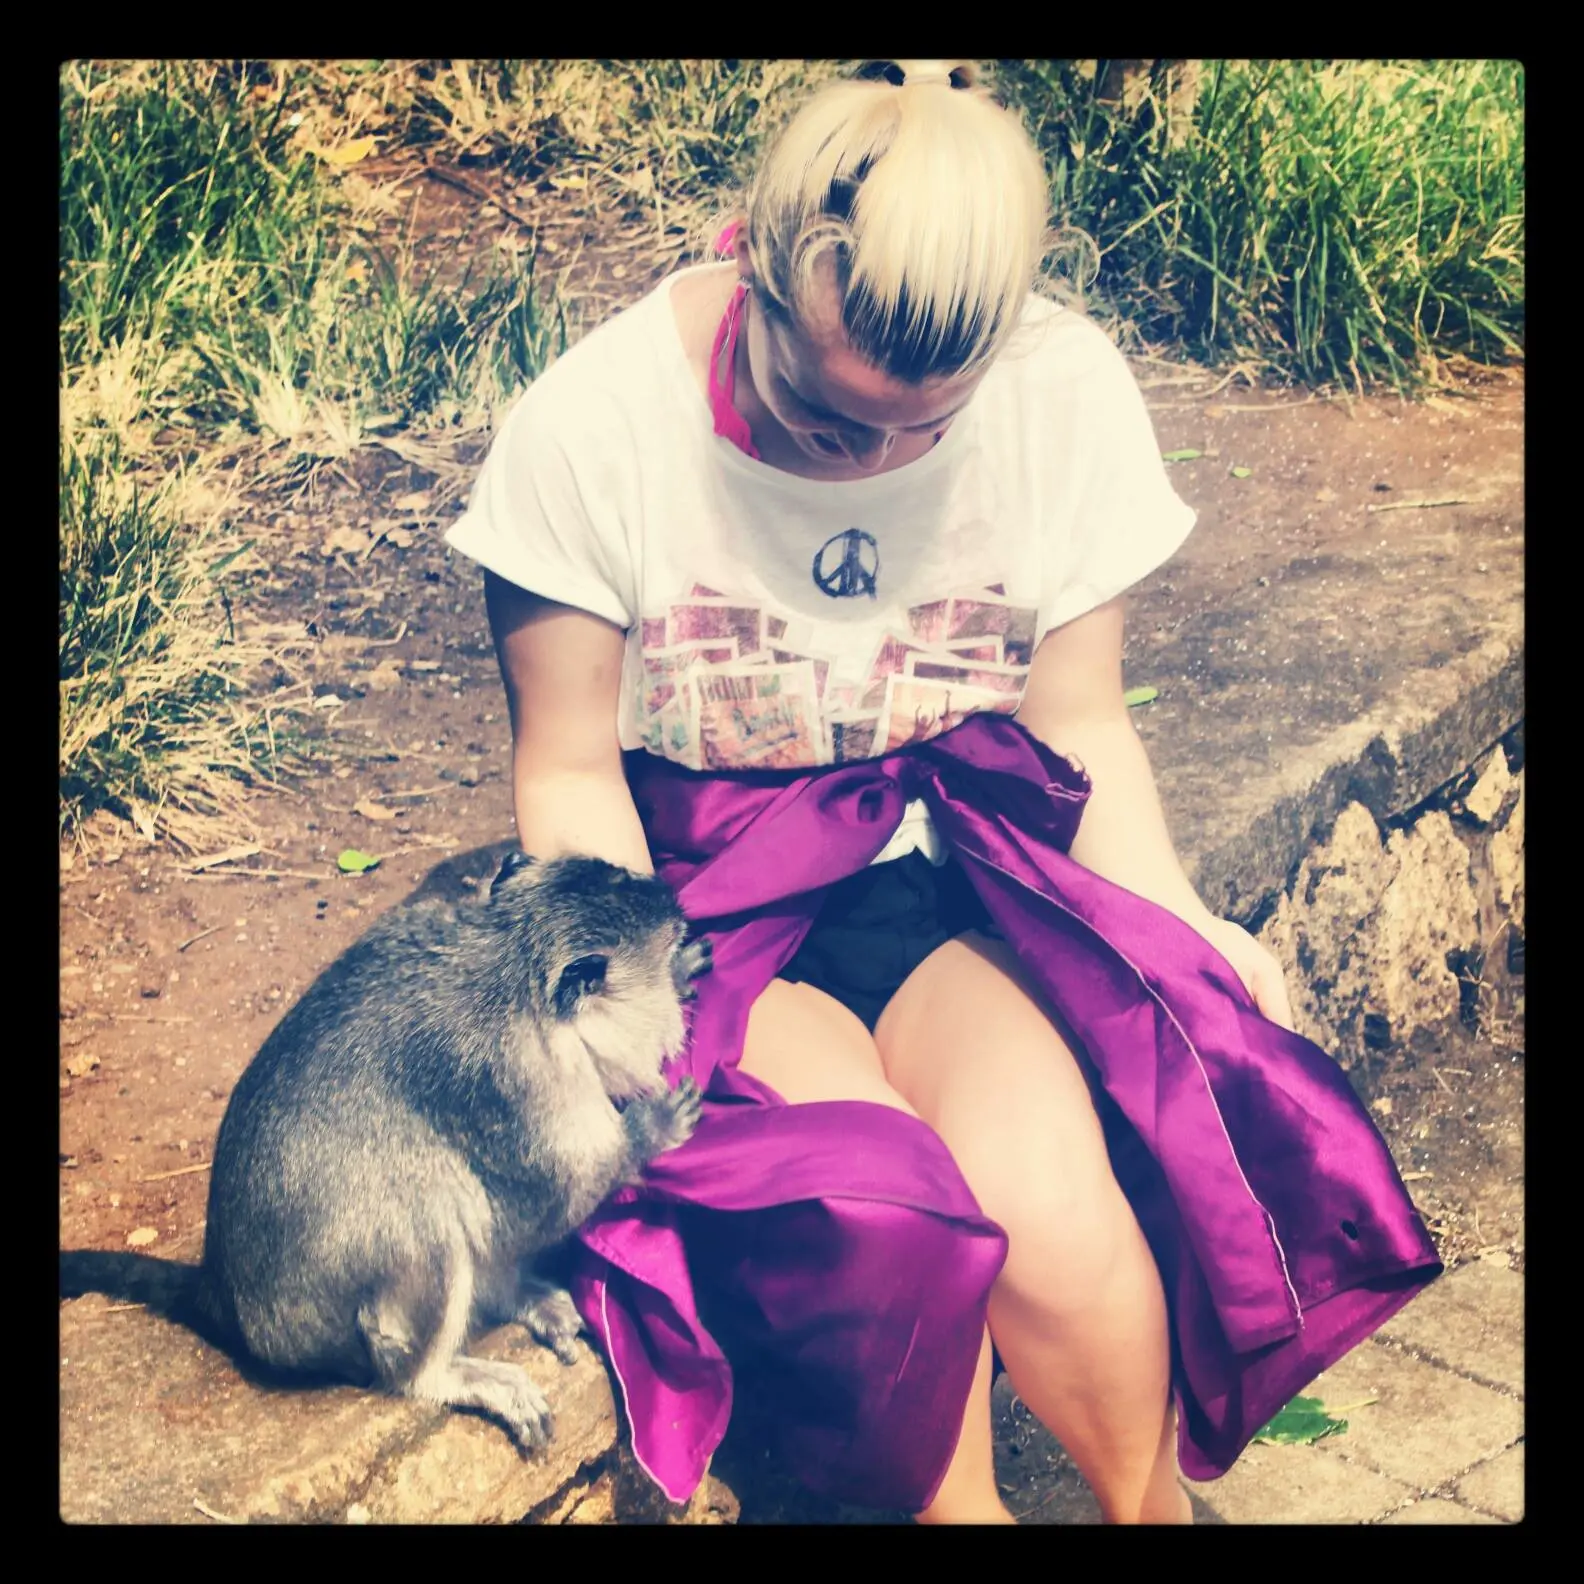 Blonde girl wearing a white t-shirt and purple sarong sitting next to a monkey that is looking for food inside the sarong at Uluwatu Temple in Bali.